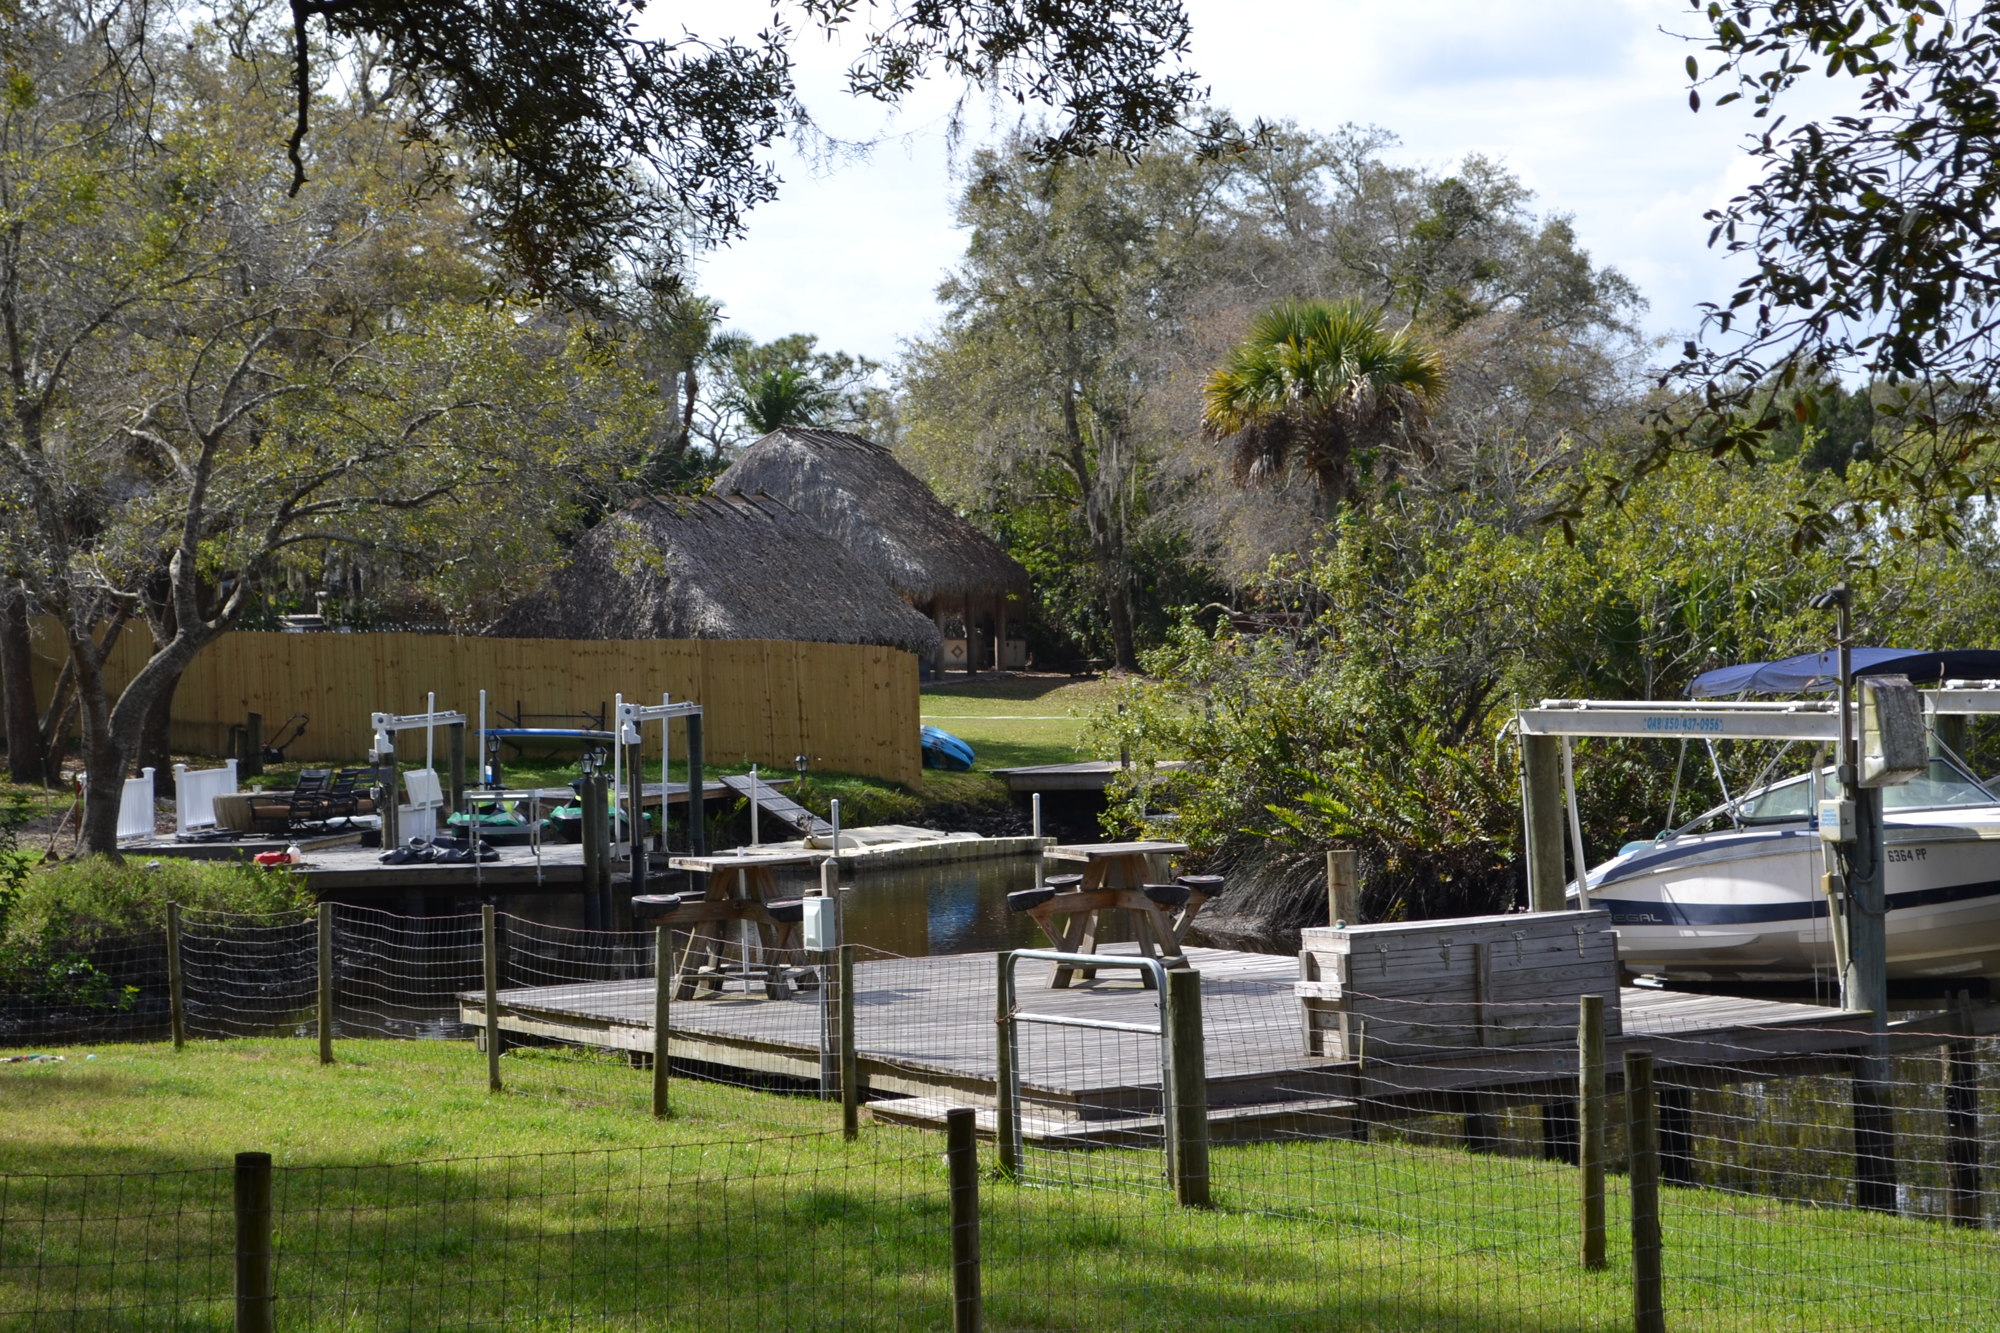 The tiki huts and decks in the backyard area of the short-term rental home on Mill Creek Road are often filled with fun-loving guests.